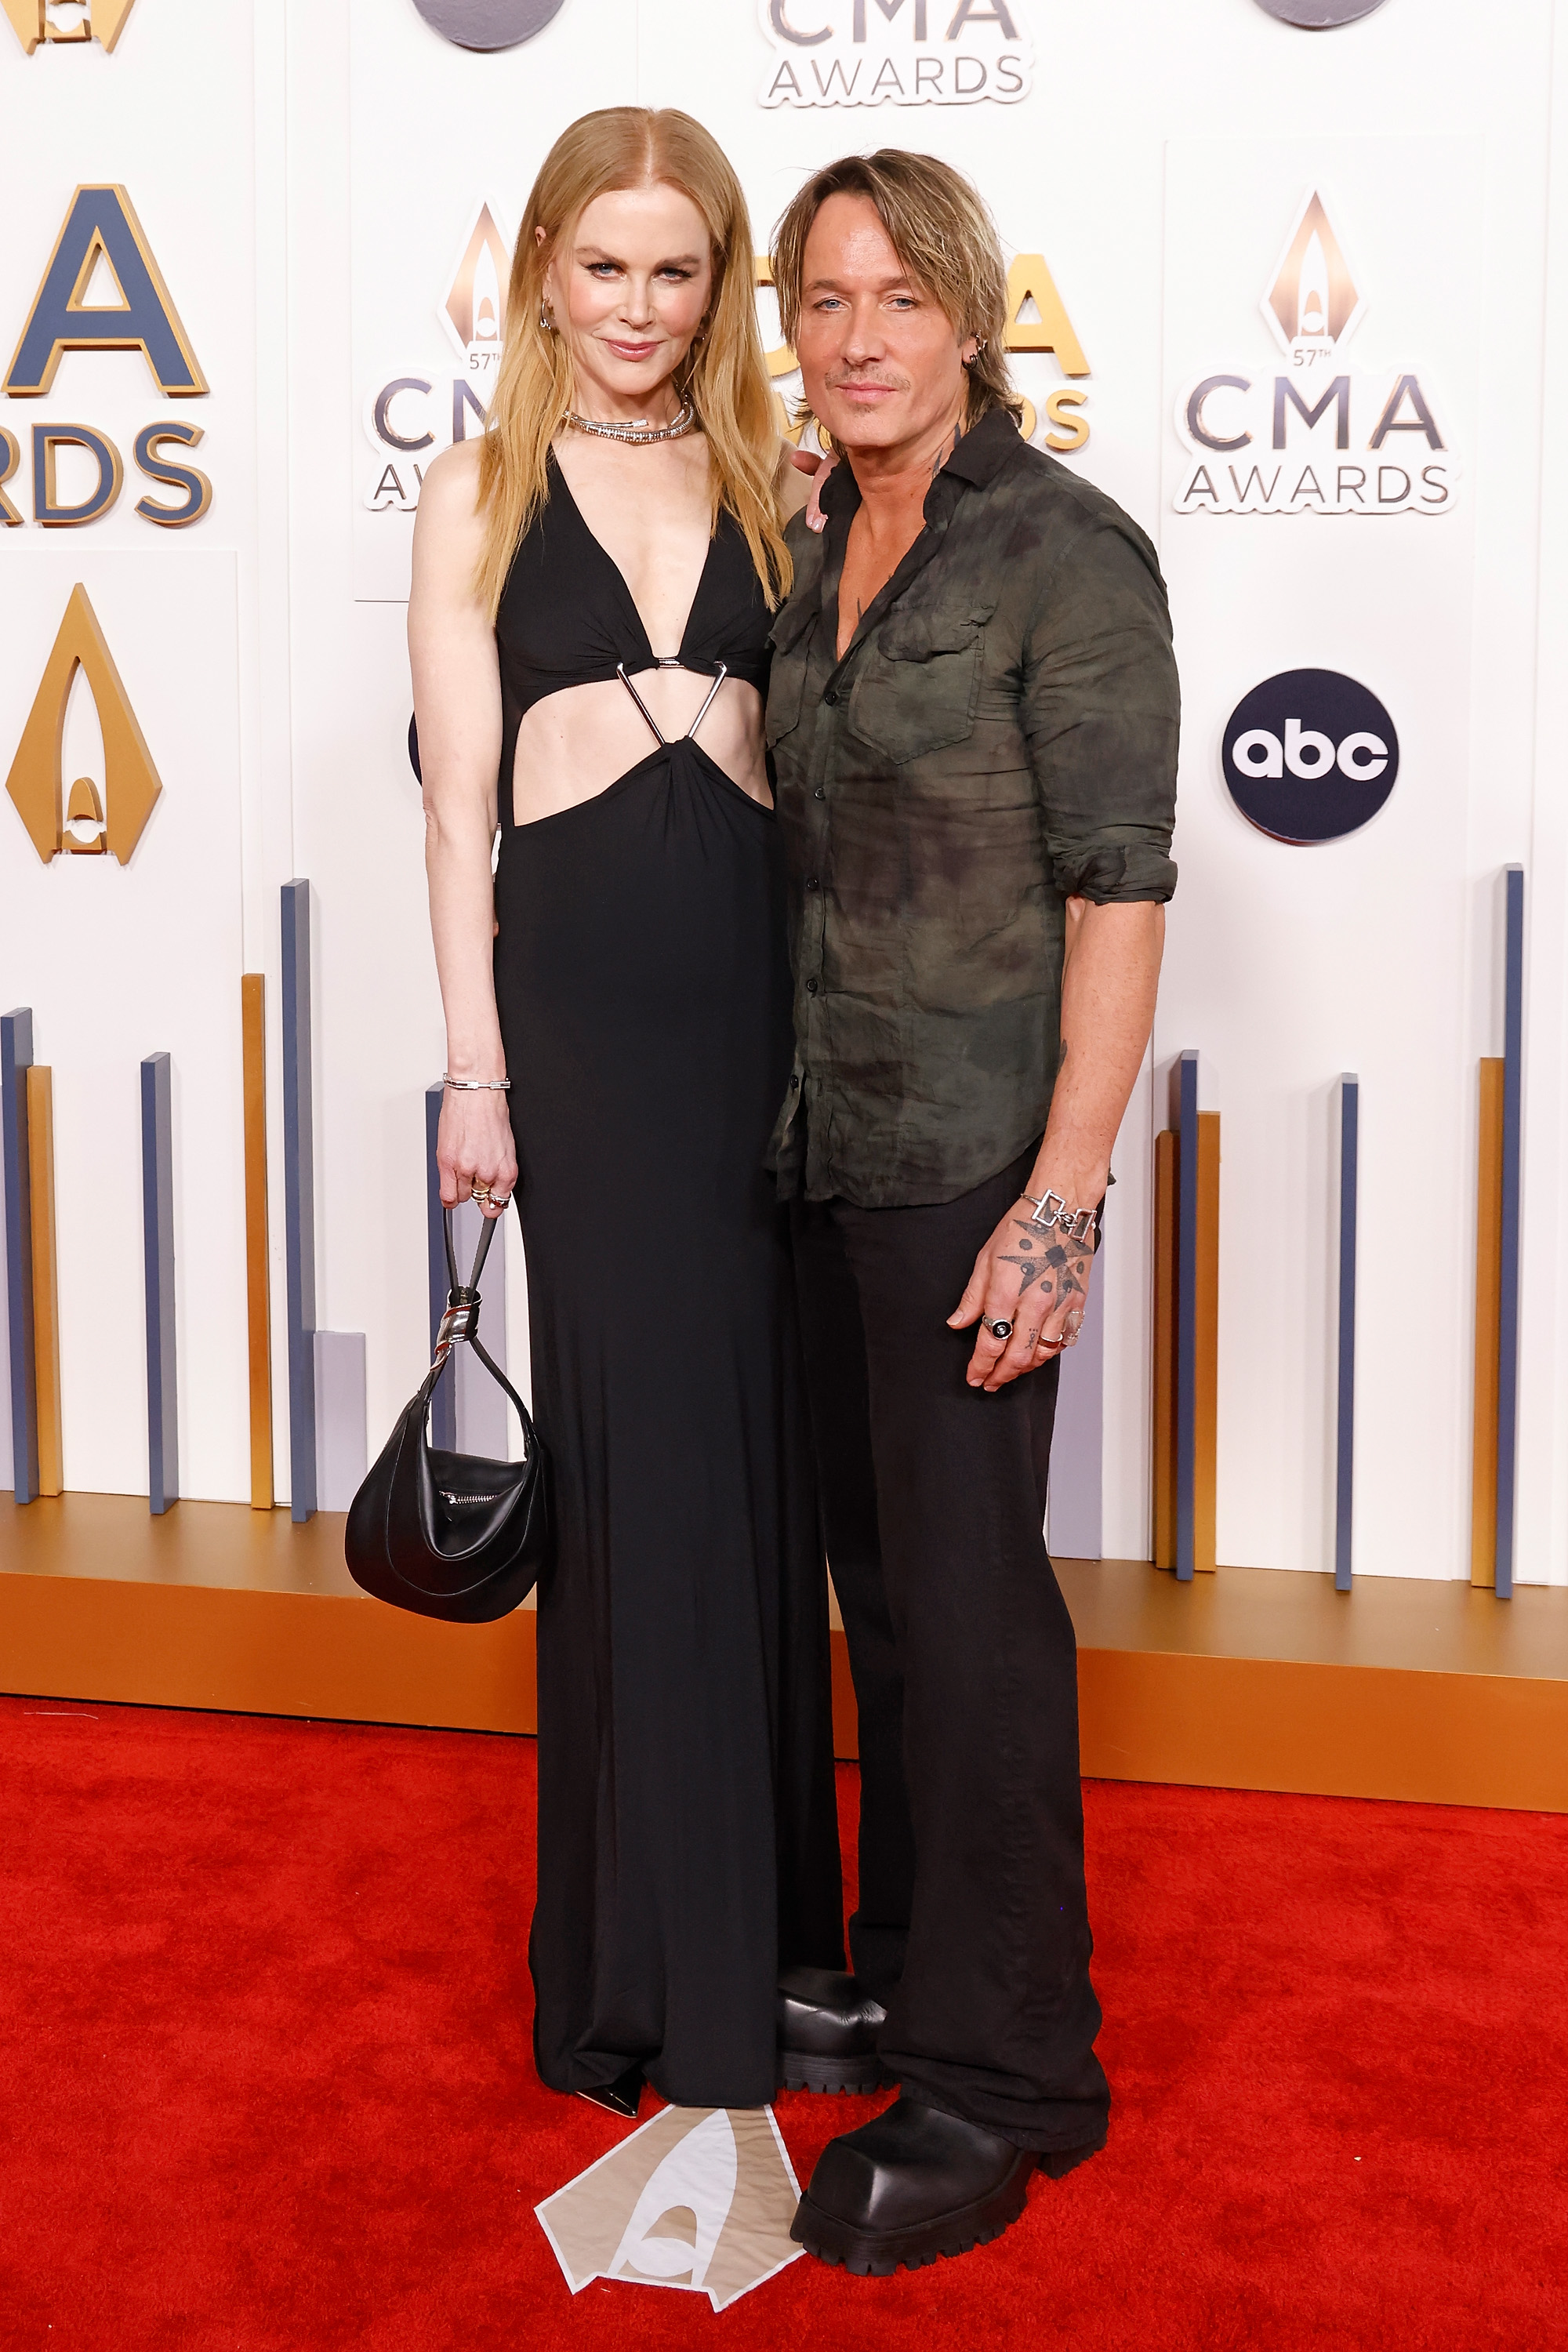 Nicole Kidman and Keith Urban at the 57th Annual CMA Awards in Nashville, Tennessee on November 8, 2023 | Source: Getty Images